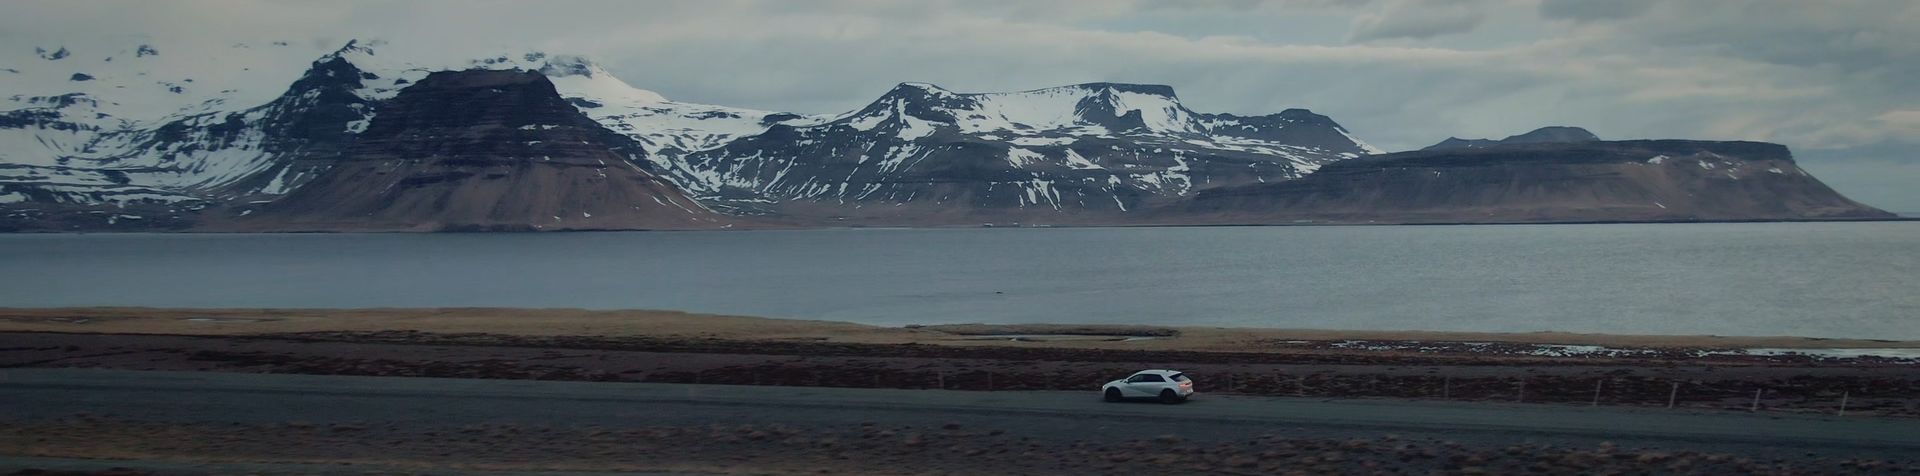 A gray IONIQ 5 drives along a road beside a lake with snow-capped mountains in the background.